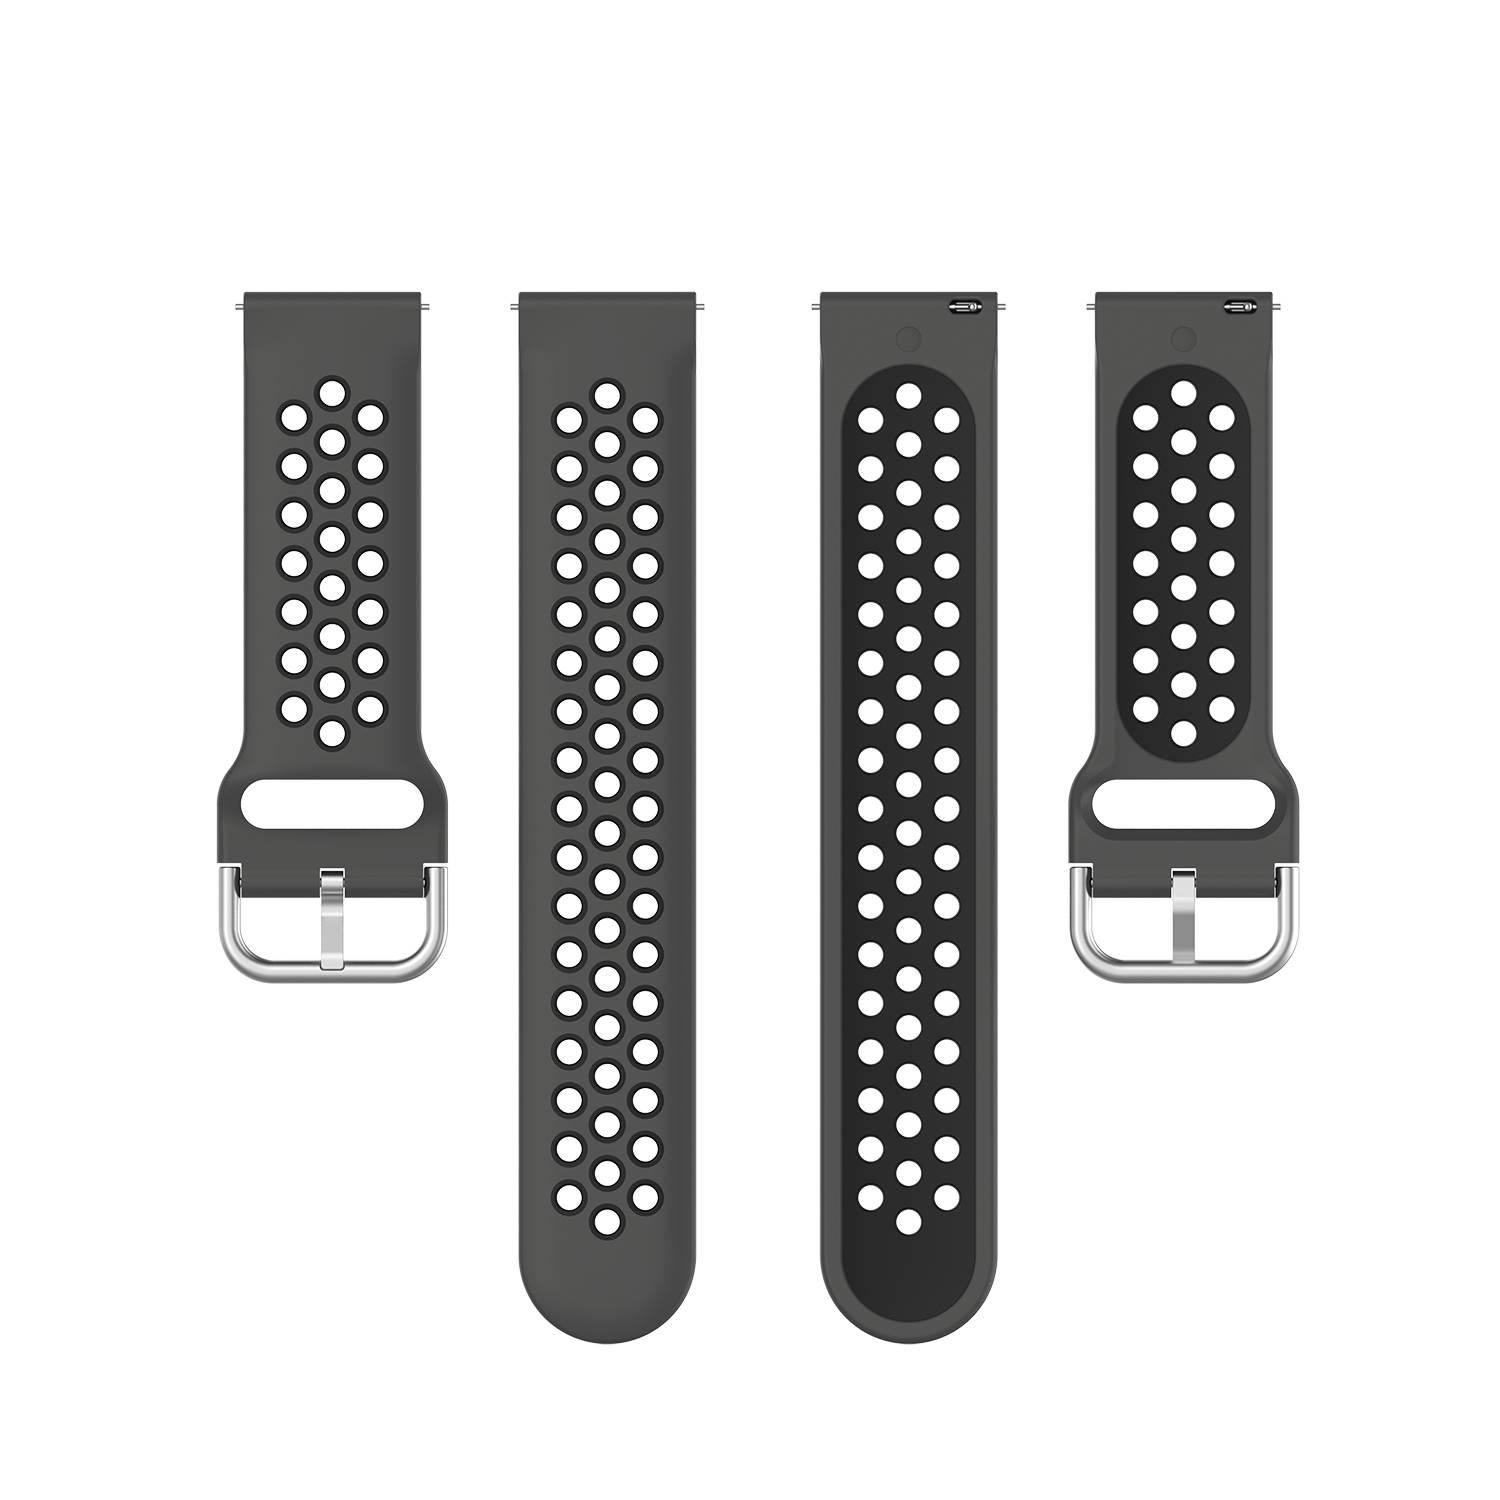 Bakeey-2022mm-Width-Universal-Sports-Dot-Pattern-Soft-Silicone-Watch-Band-Strap-Replacement-for-Sams-1736311-6